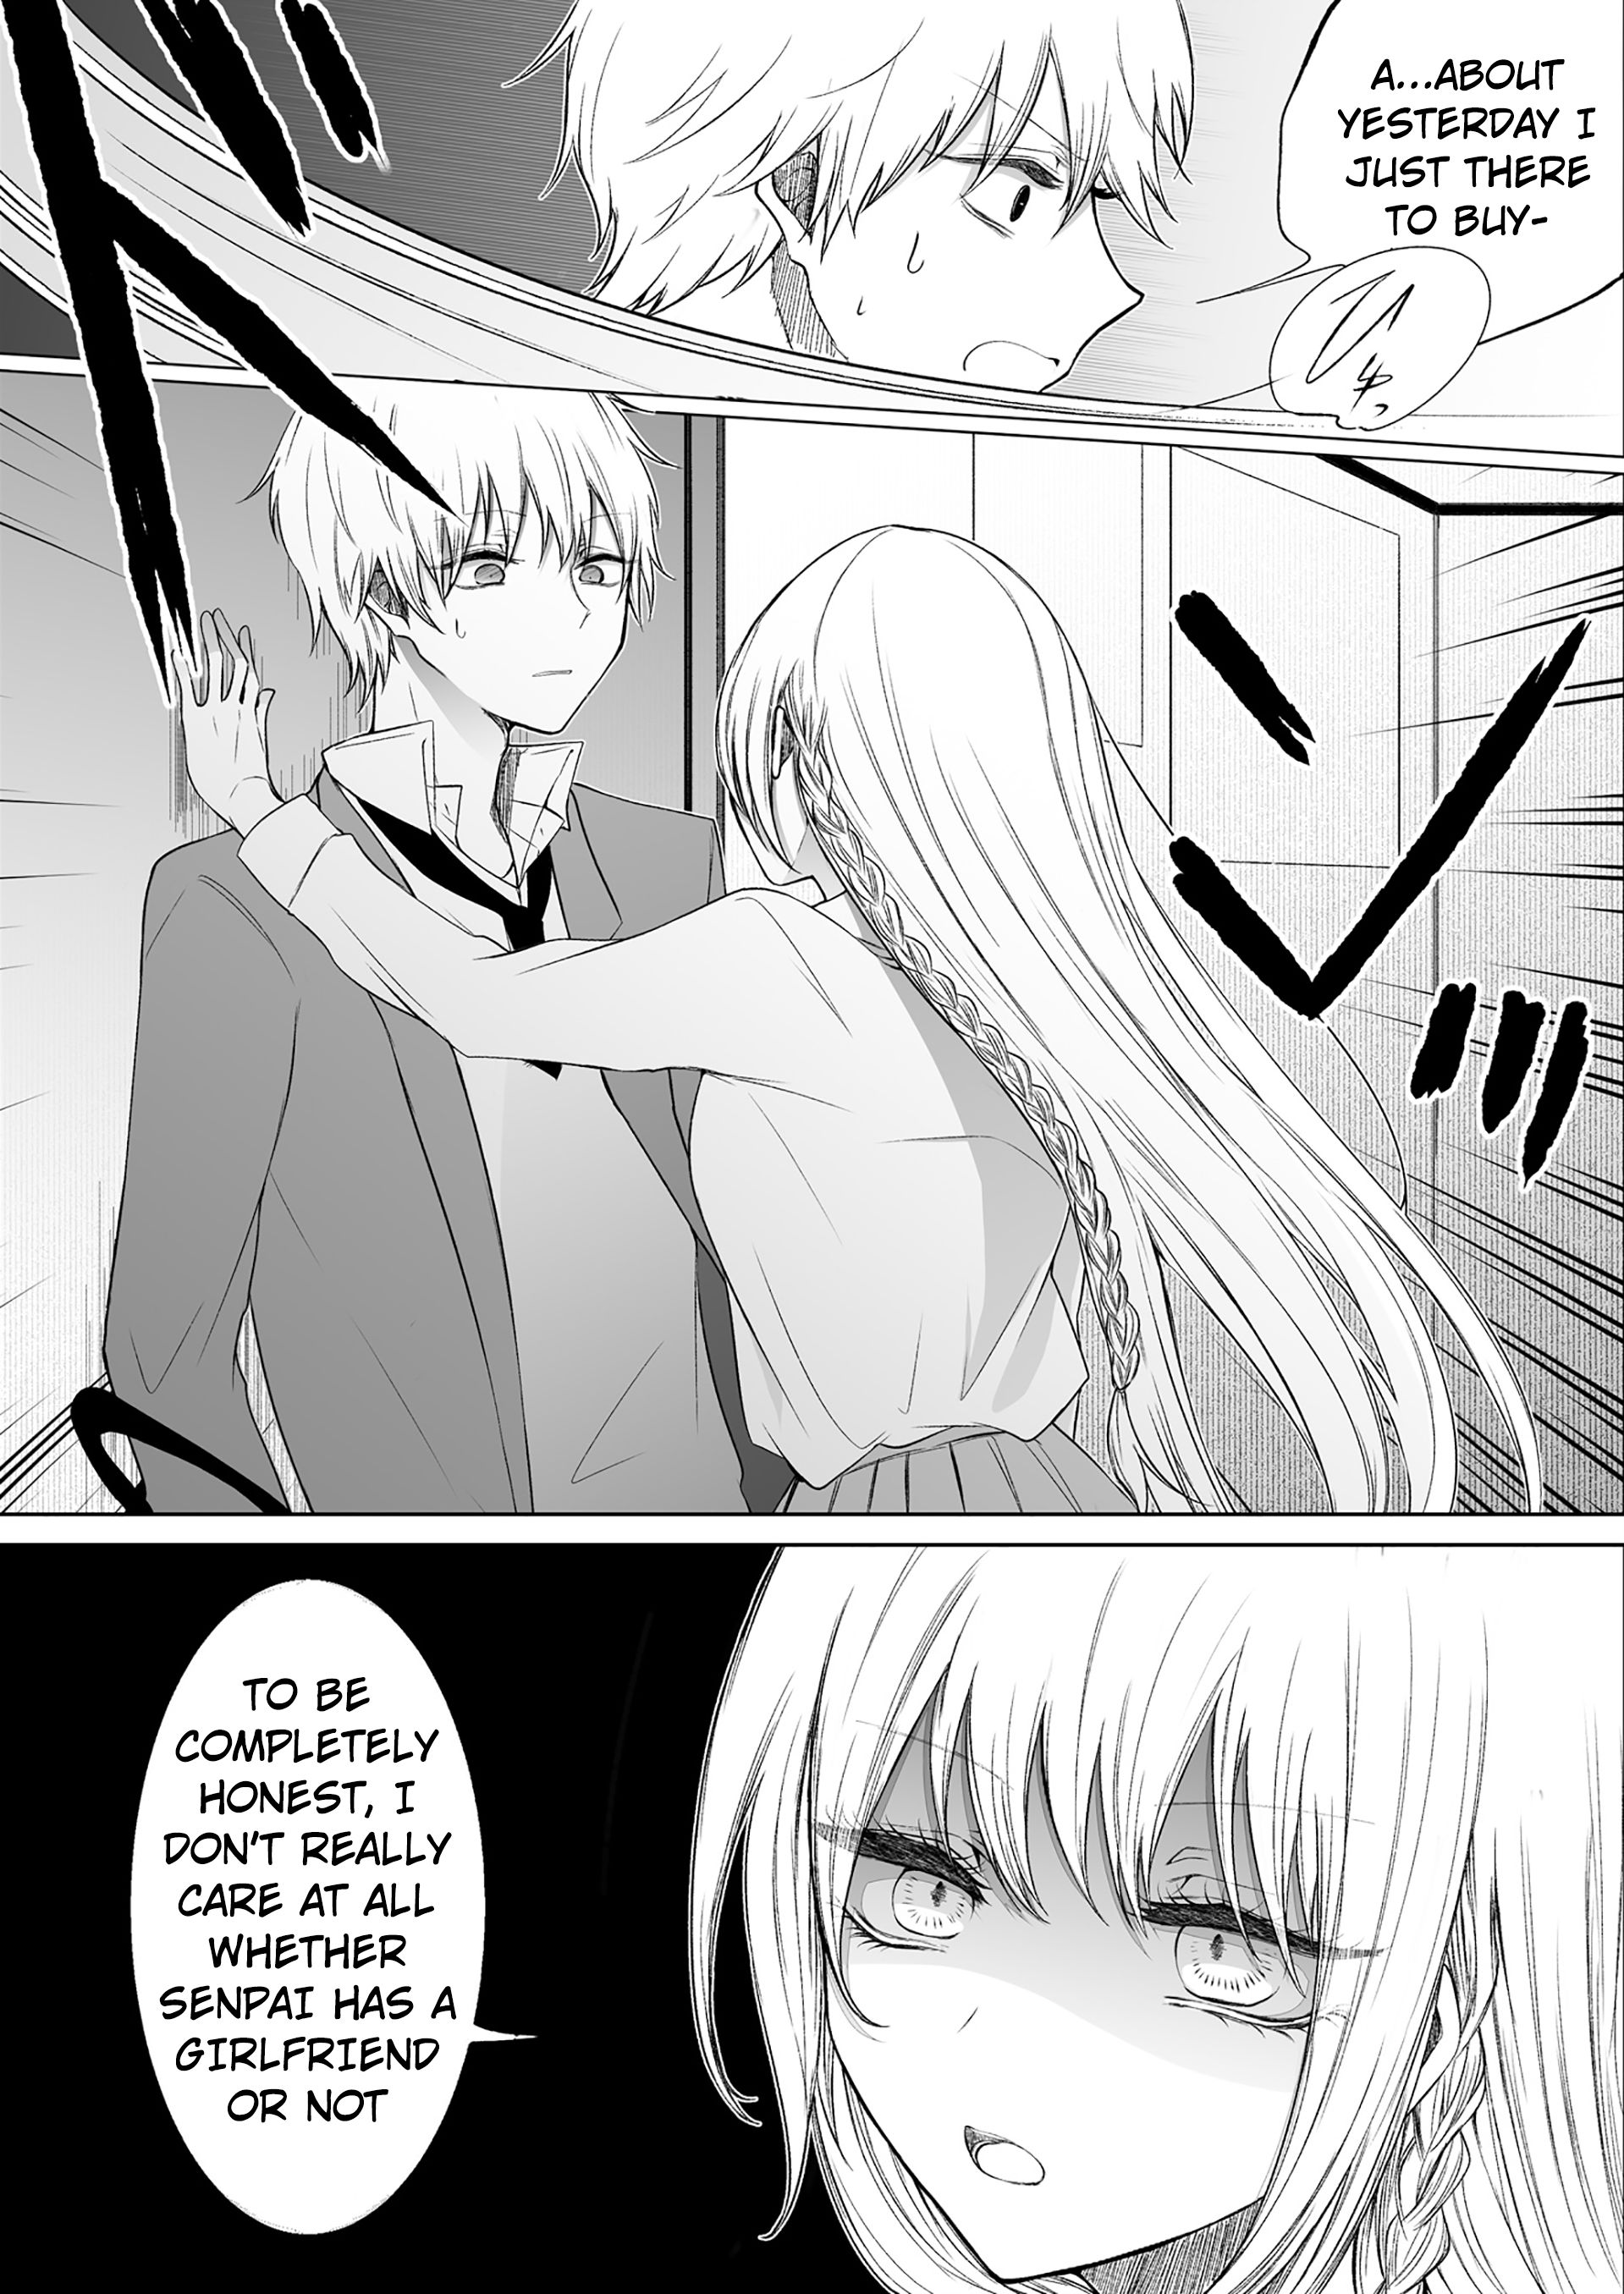 Read After God (Manga) Chapter 14: Another Assaulting Dream - Comikey